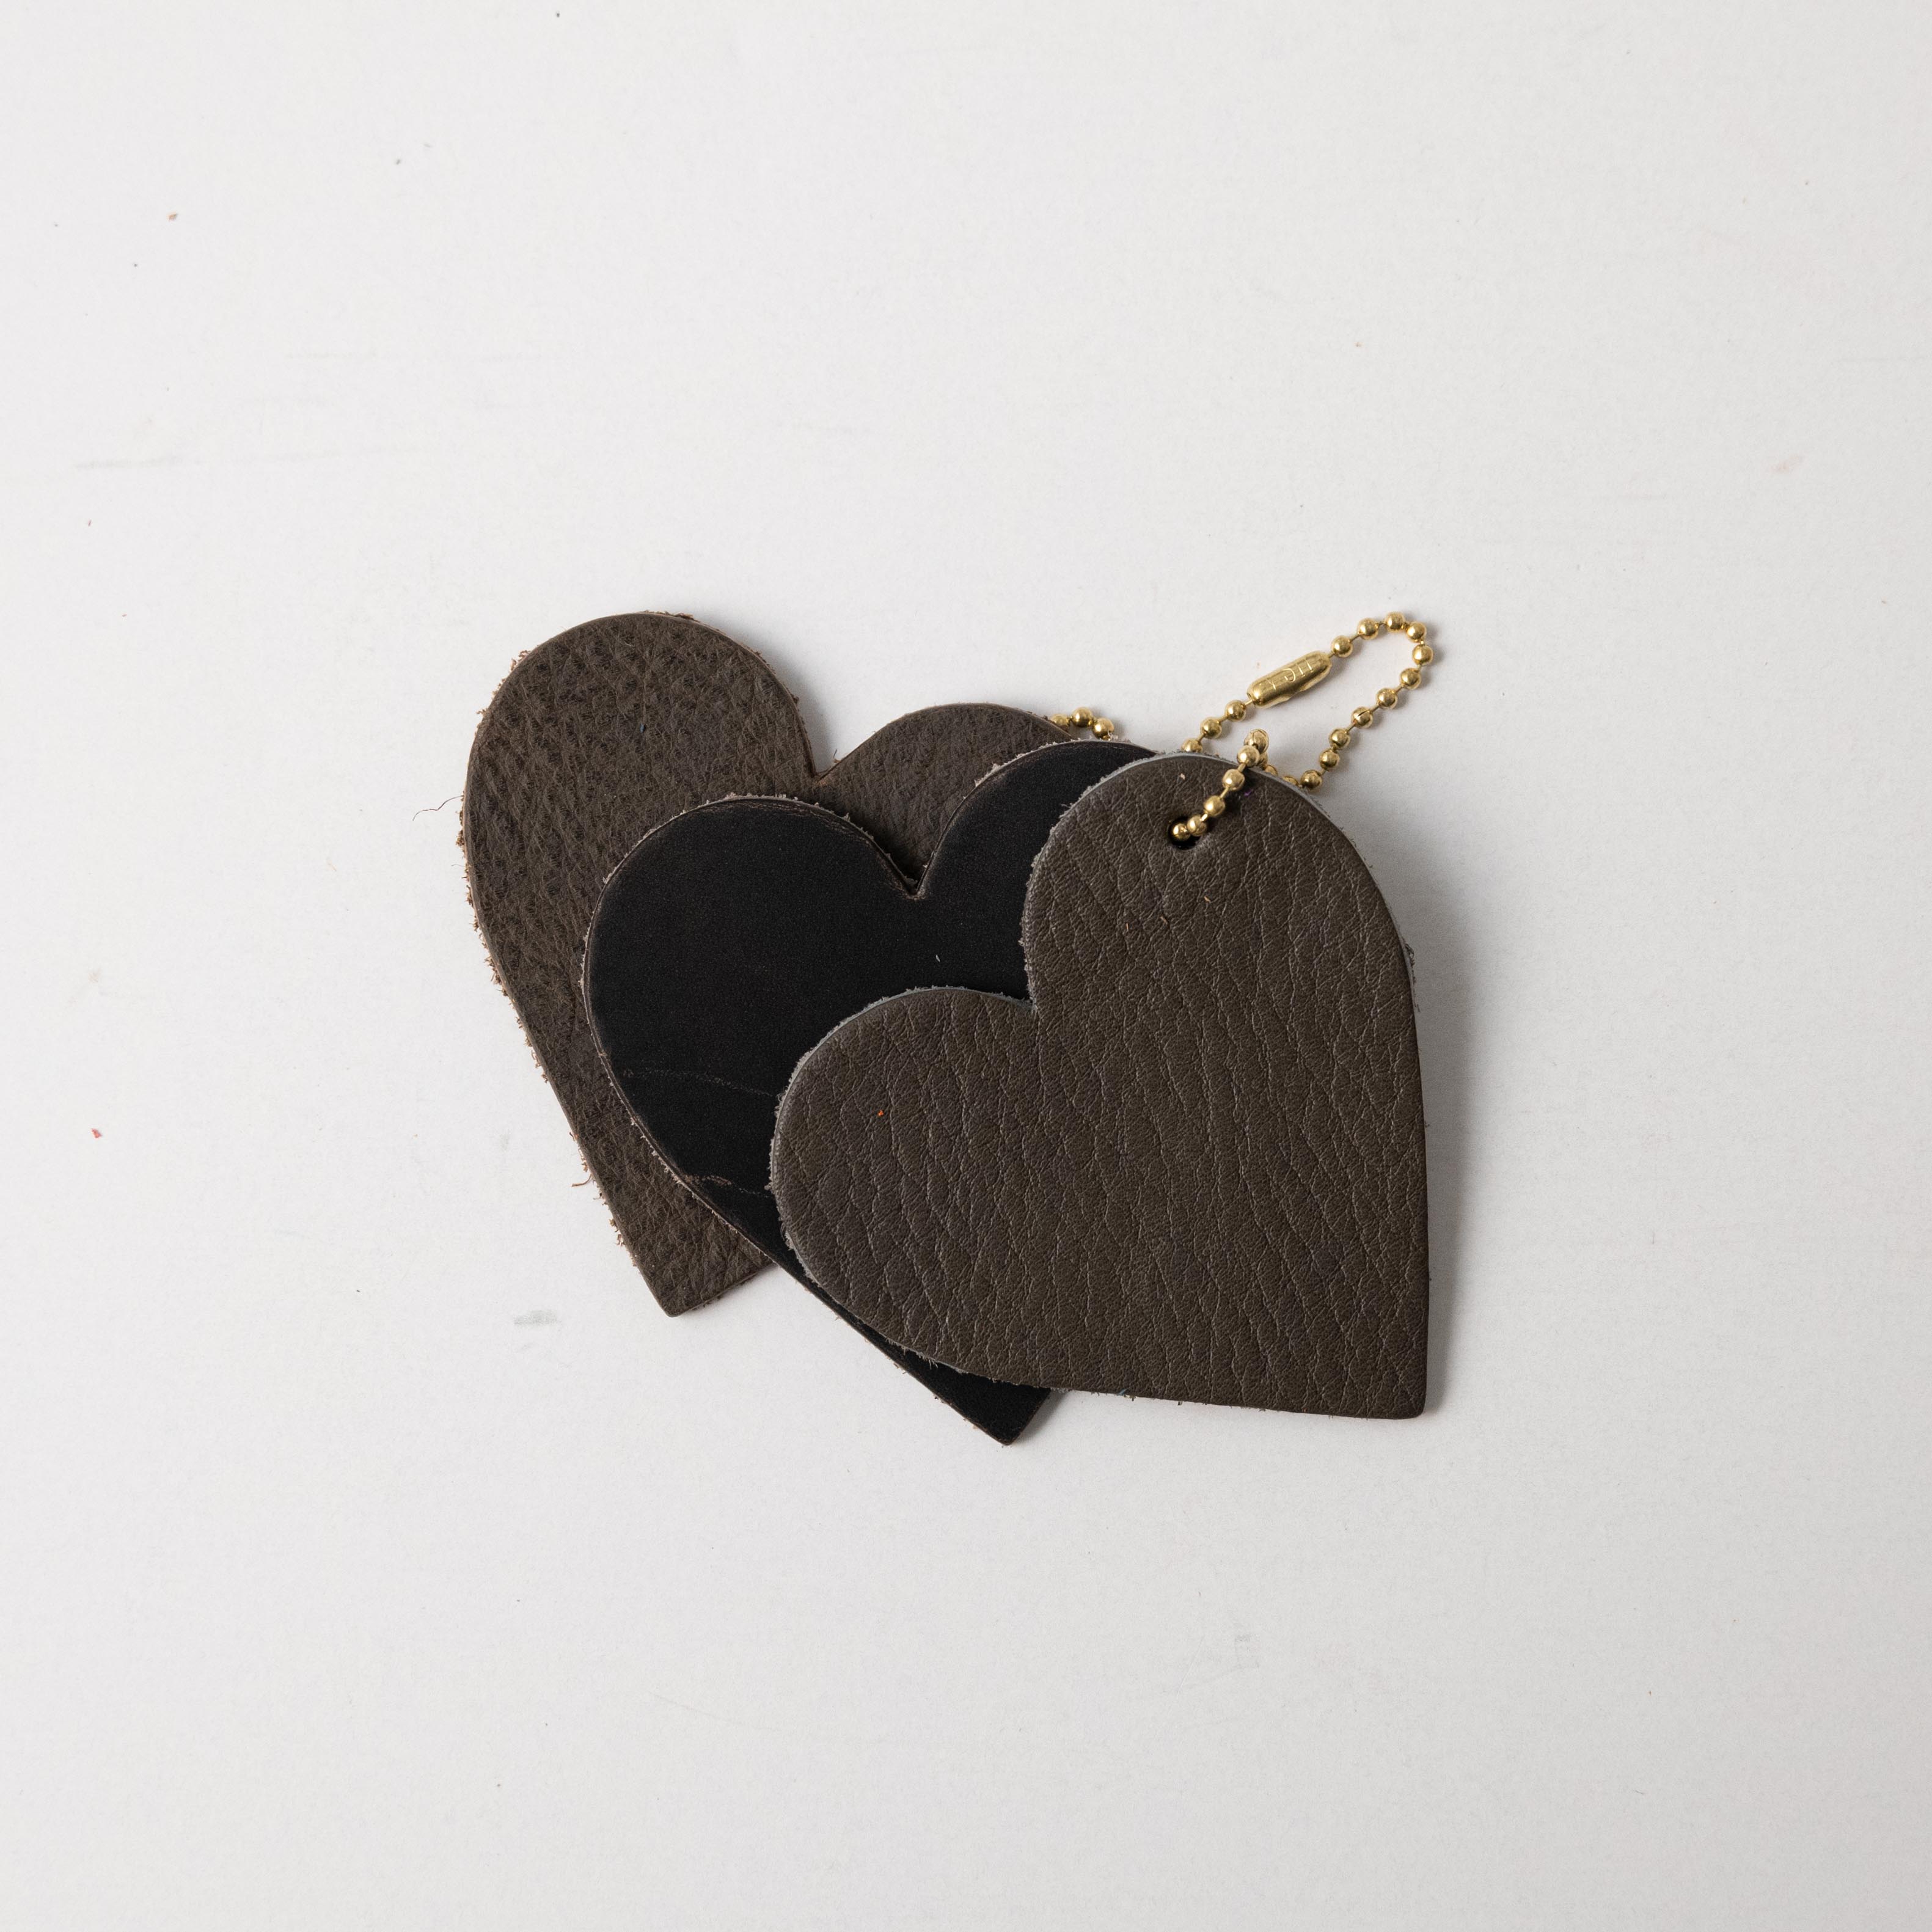 KMM & Co. Grey Heart Charms | Leather Bag Charms Handmade in The USA